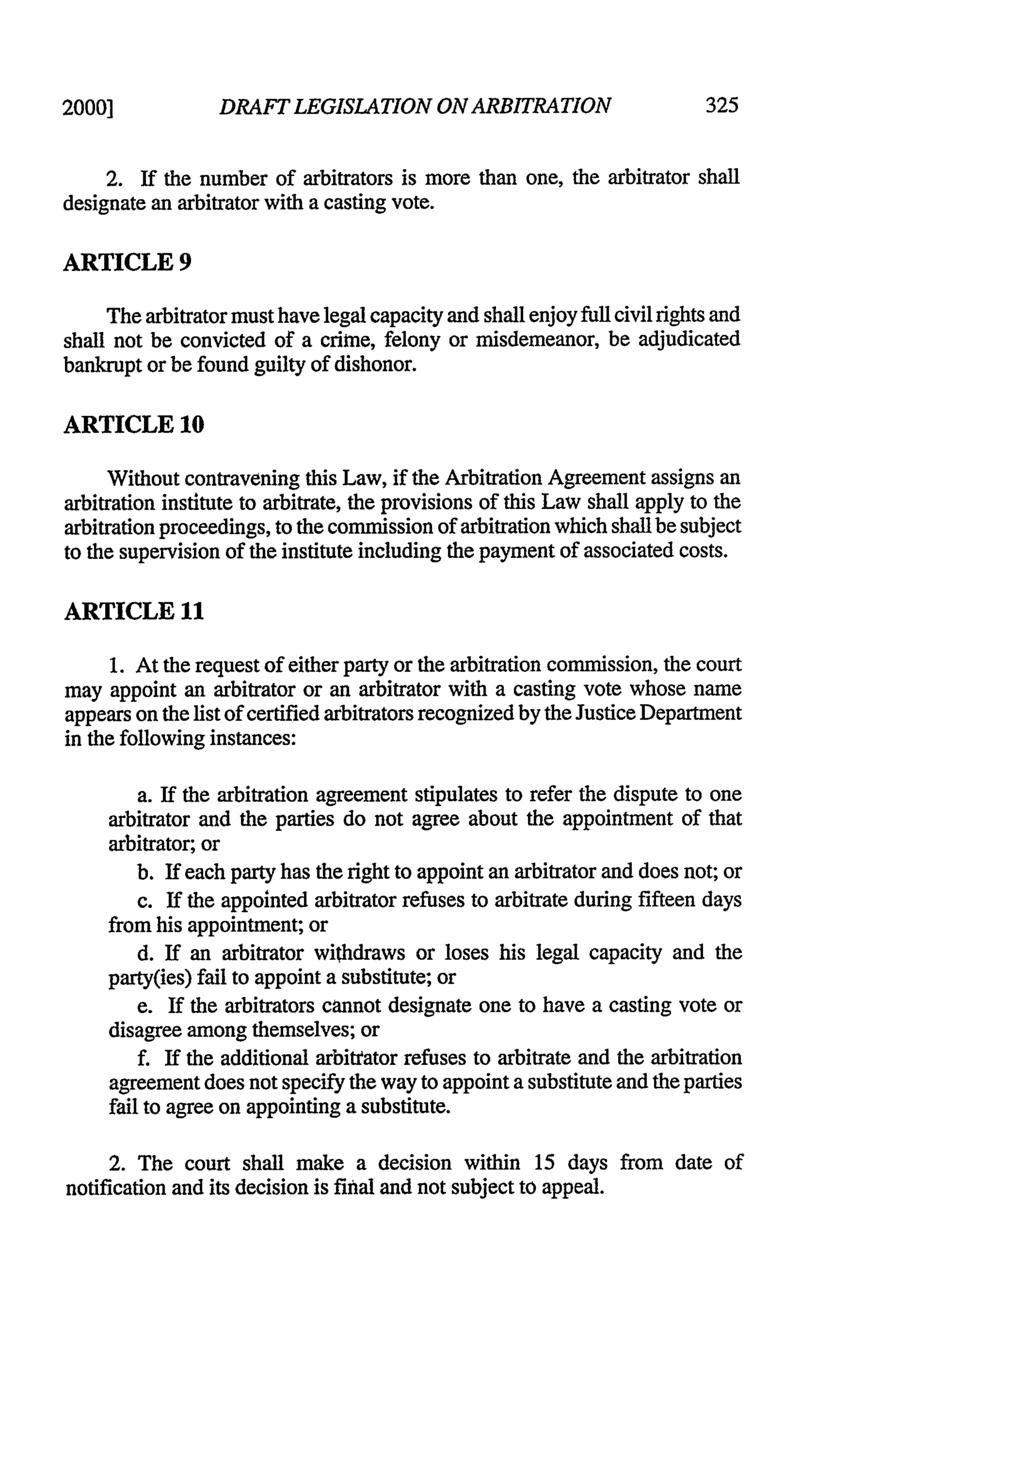 2000] DRAFT LEGISLATION ON ARBITRATION 2. If the number of arbitrators is more than one, the arbitrator shall designate an arbitrator with a casting vote.